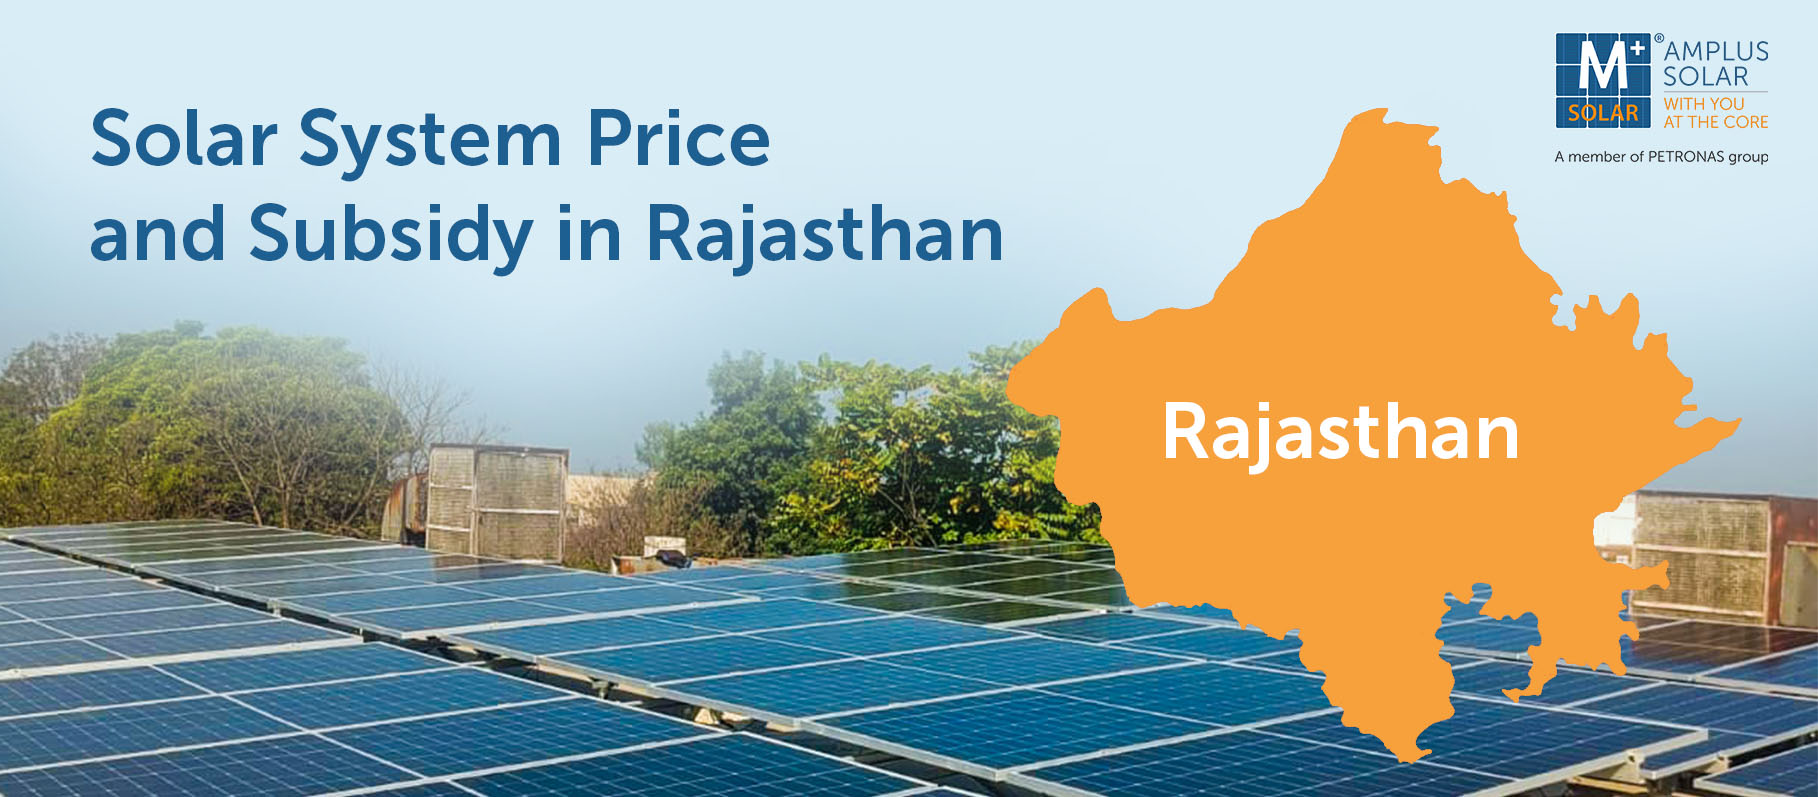 Solar System Price and subsidy in Rajasthan